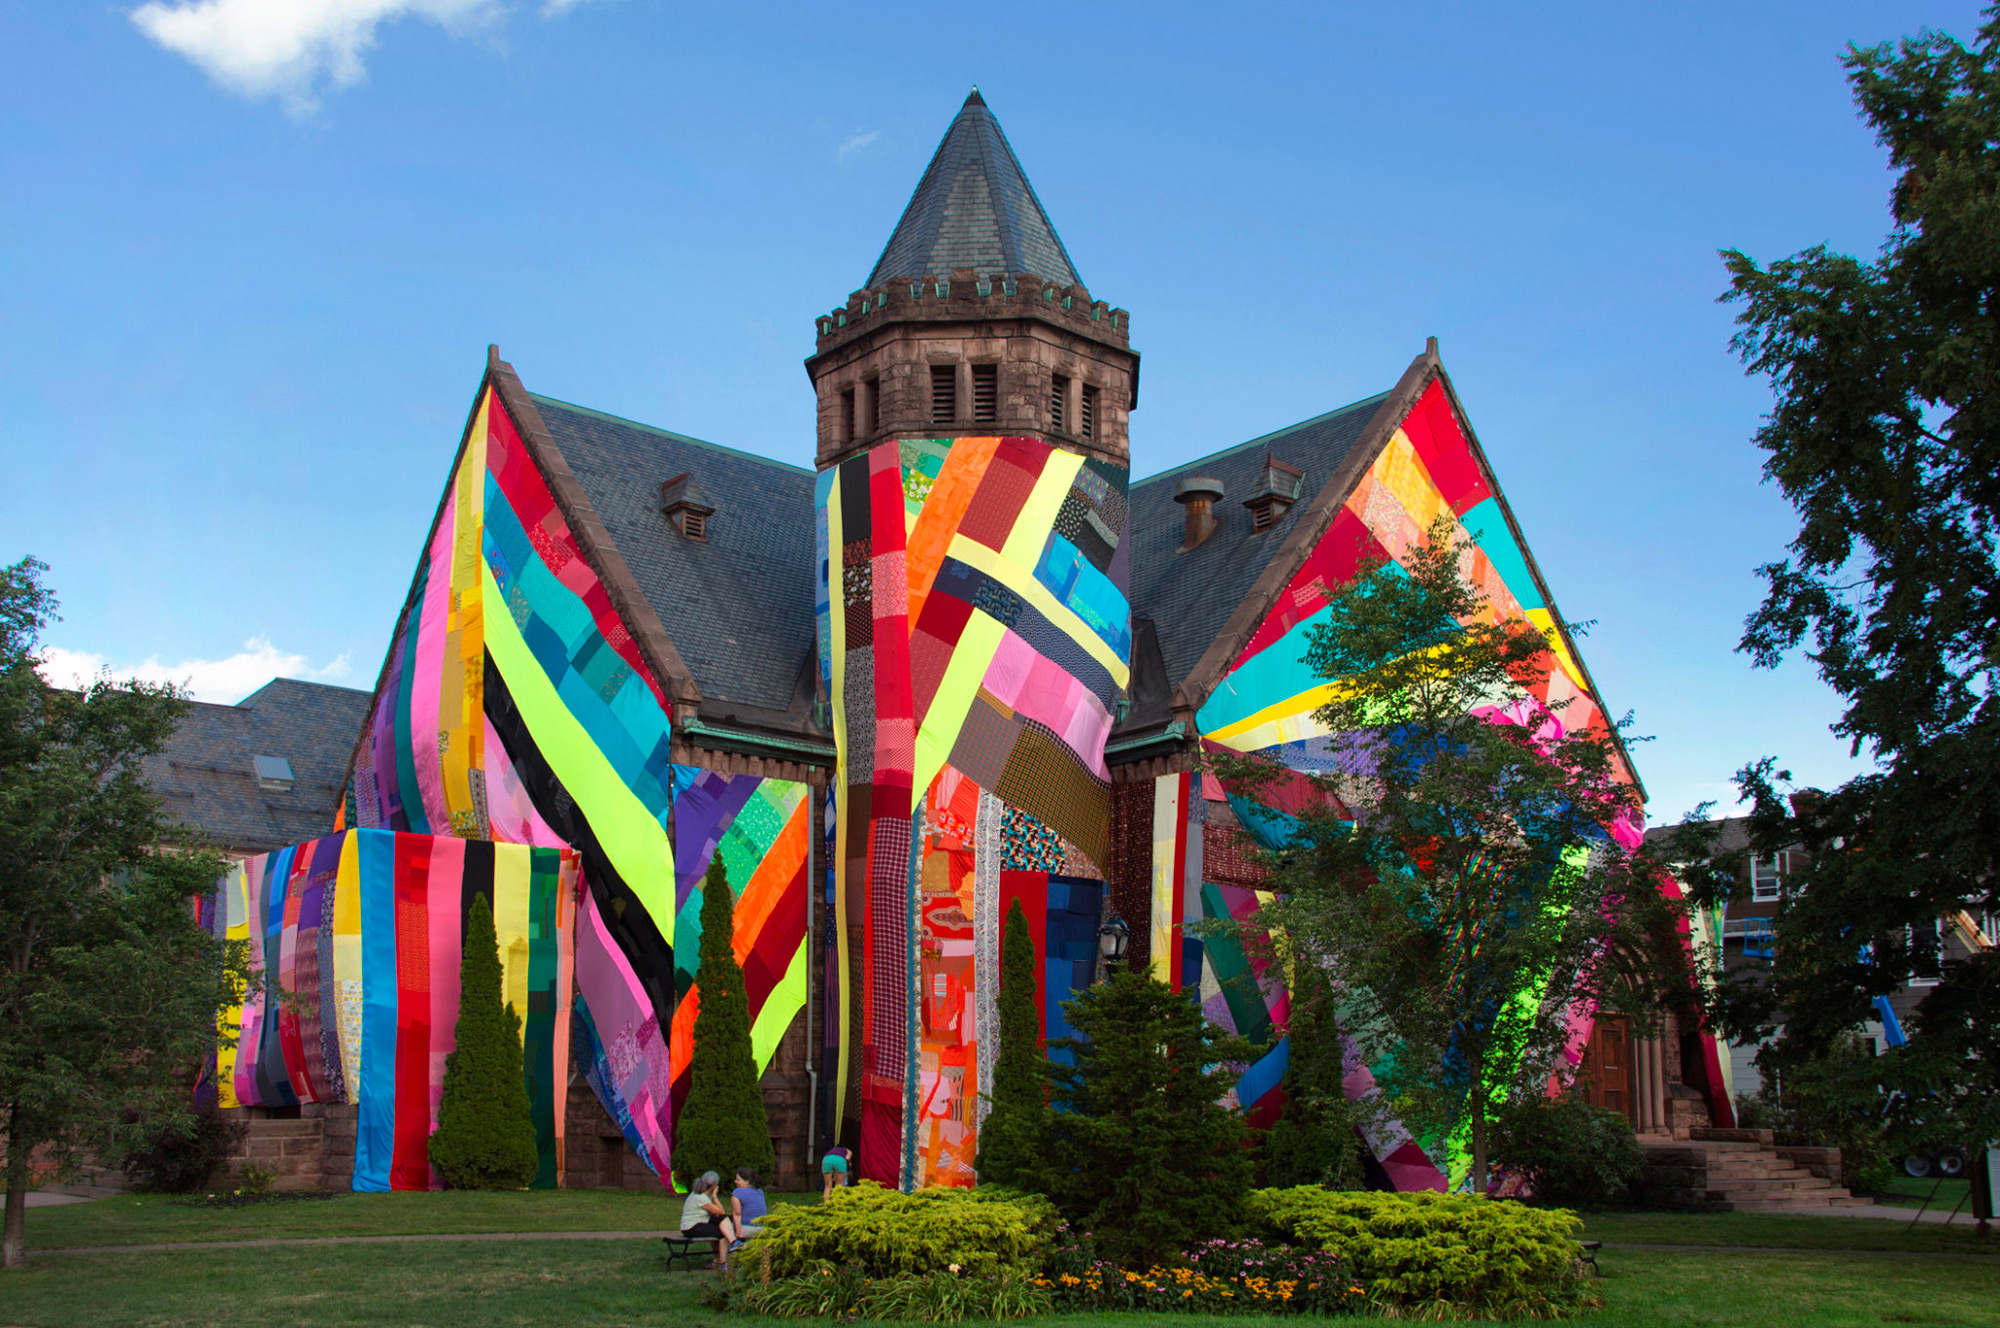 Enormous Panels of Patchworked Fabric Give Colorful Temporary Makeovers to Public Buildings